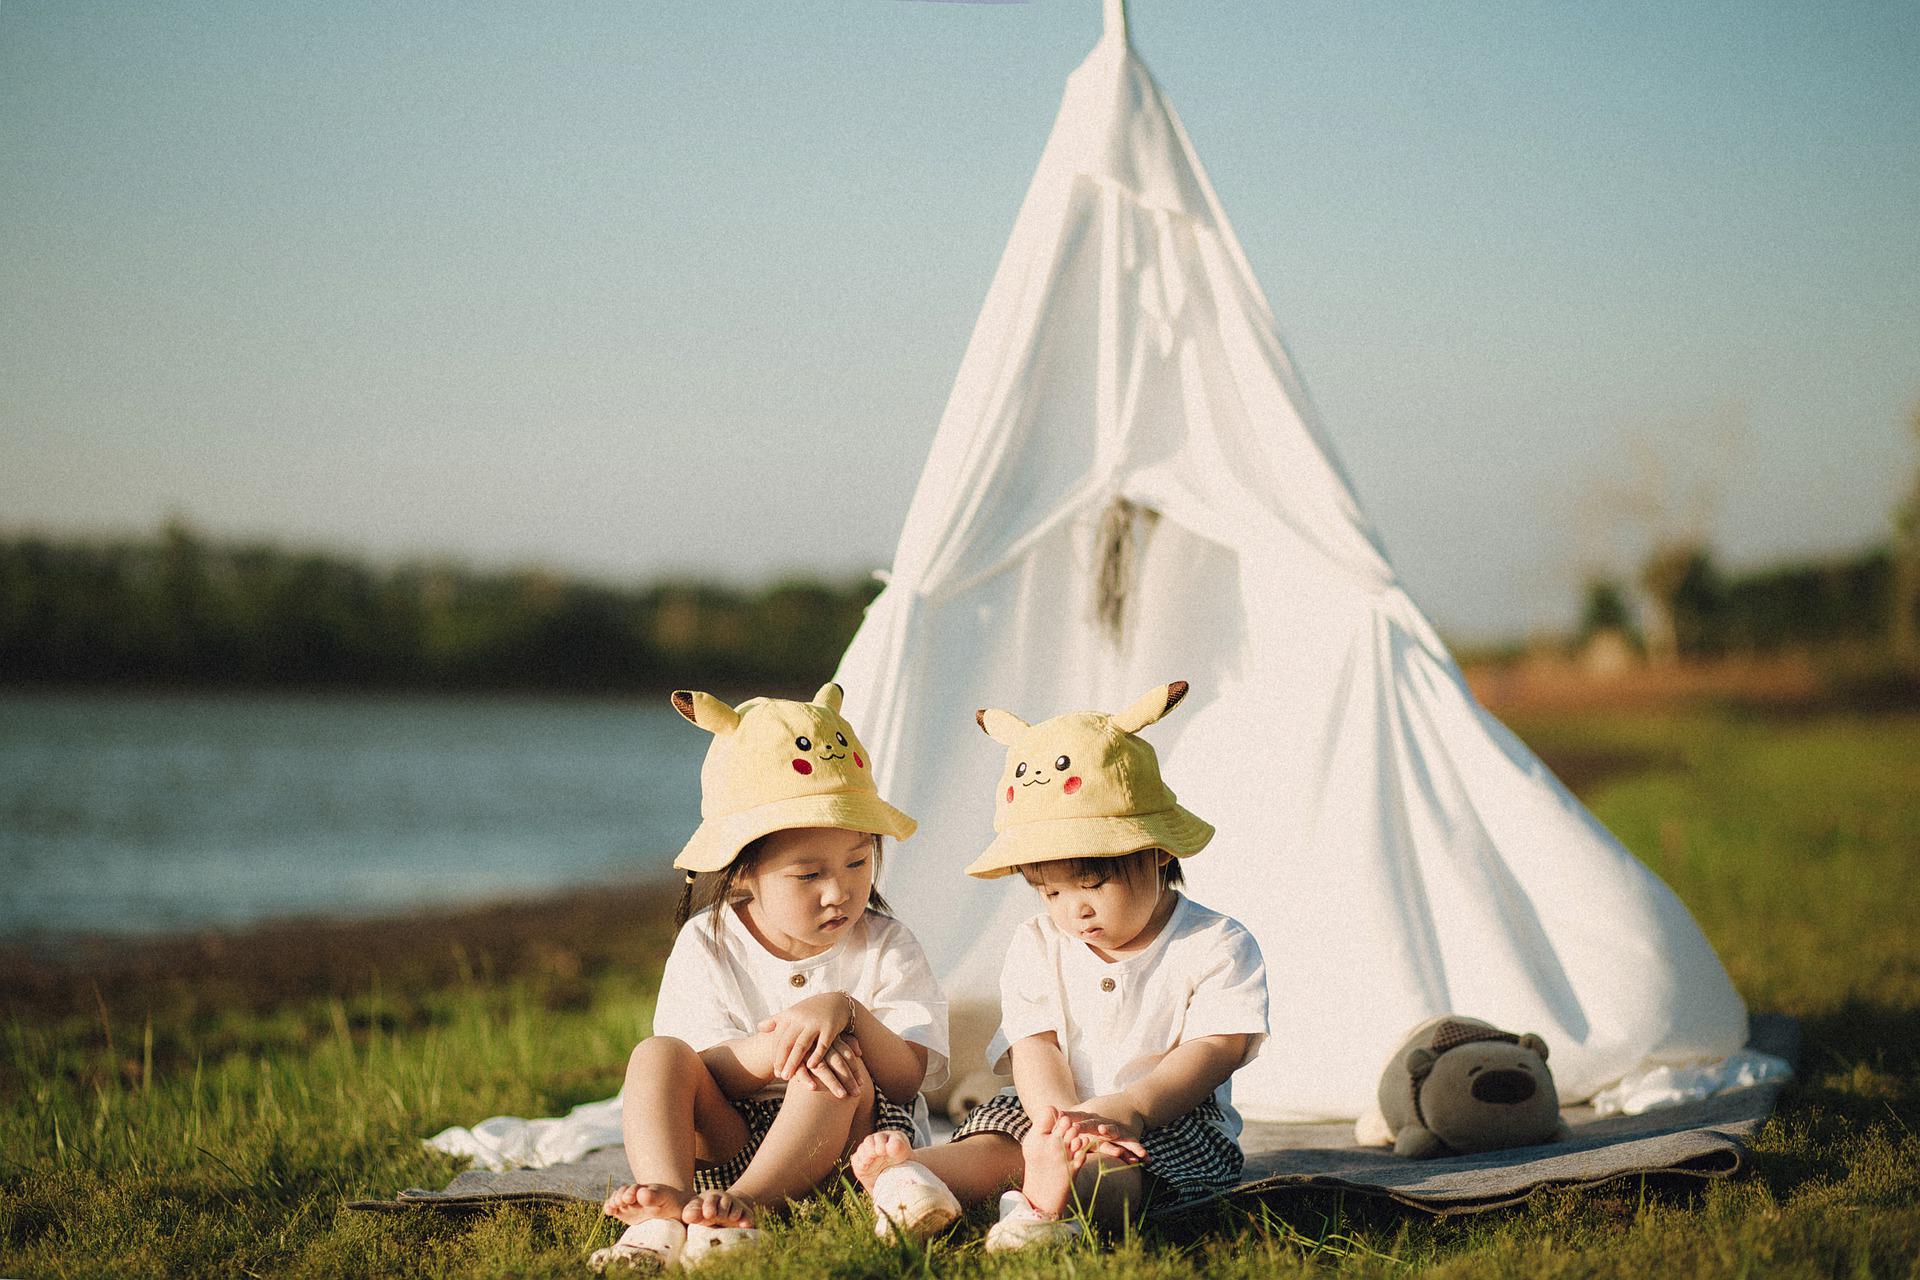 Two children sit in front of a tee-pee style tent with a body of water in the background